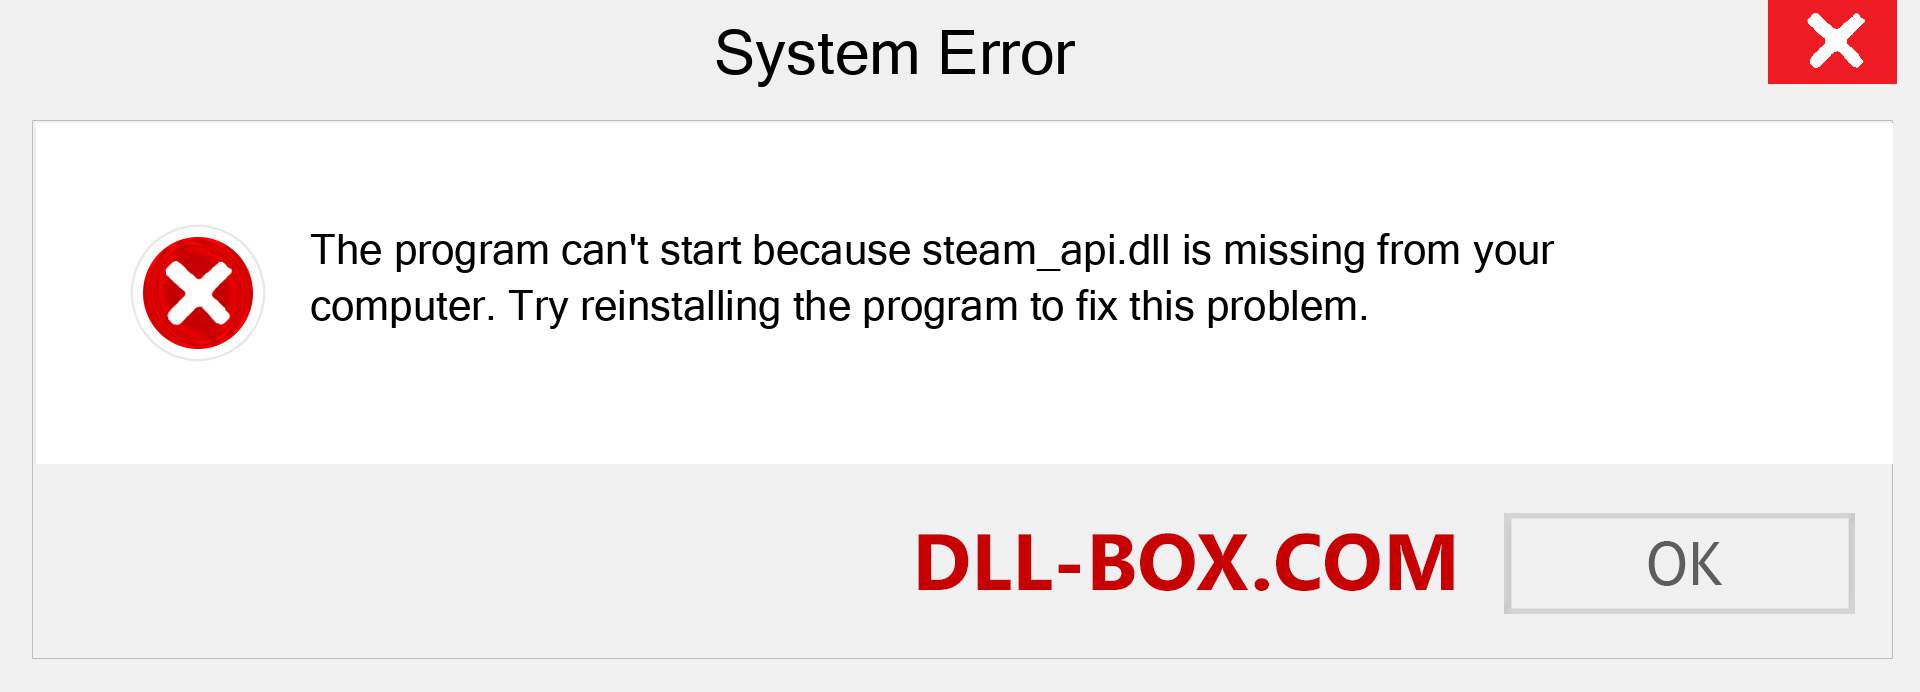  steam_api.dll file is missing?. Download for Windows 7, 8, 10 - Fix  steam_api dll Missing Error on Windows, photos, images